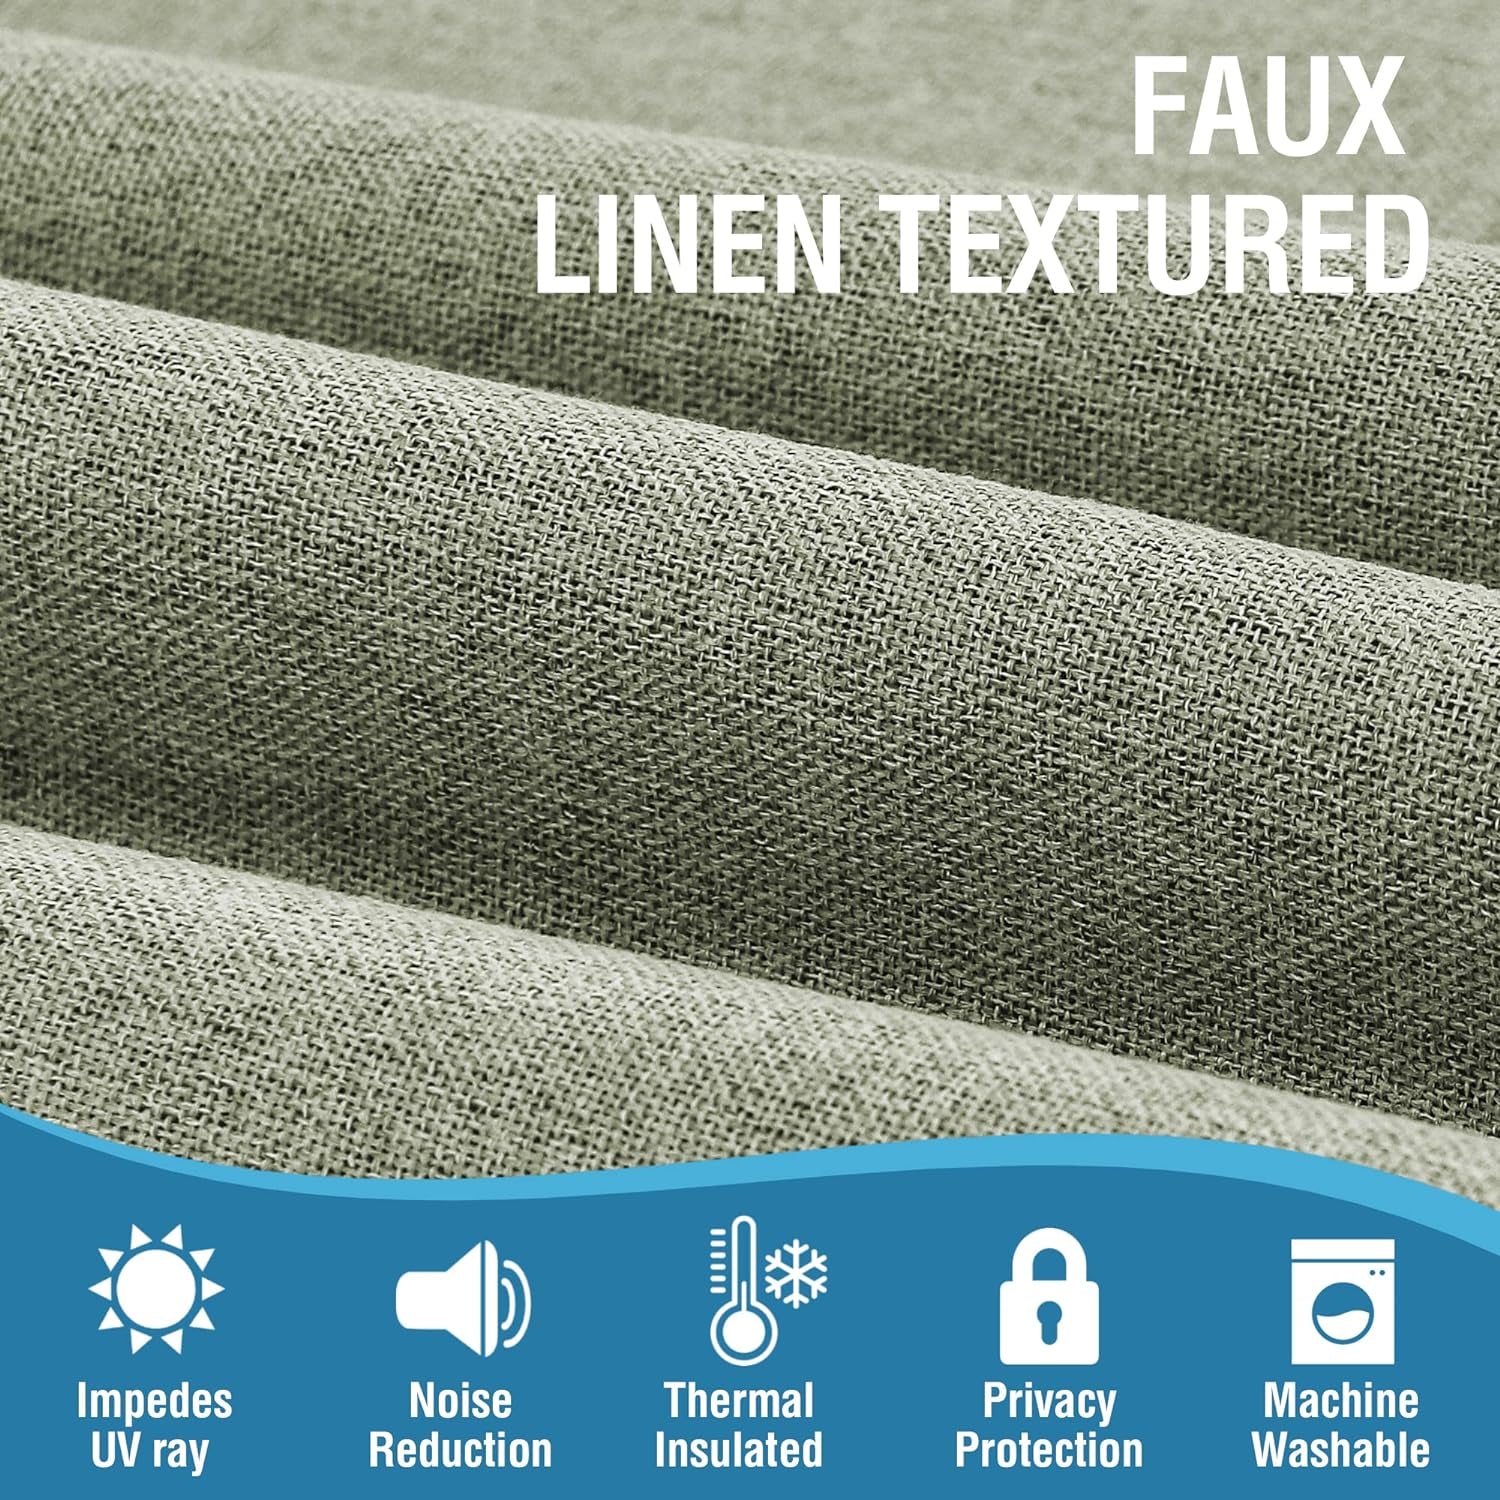 H.VERSAILTEX 100% Blackout Linen Look Curtains Thermal Insulated Curtains for Living Room Textured Burlap Drapes for Bedroom Grommet Linen Noise Blocking Curtains 42 X 84 Inch, 2 Panels - Sage  H.VERSAILTEX   